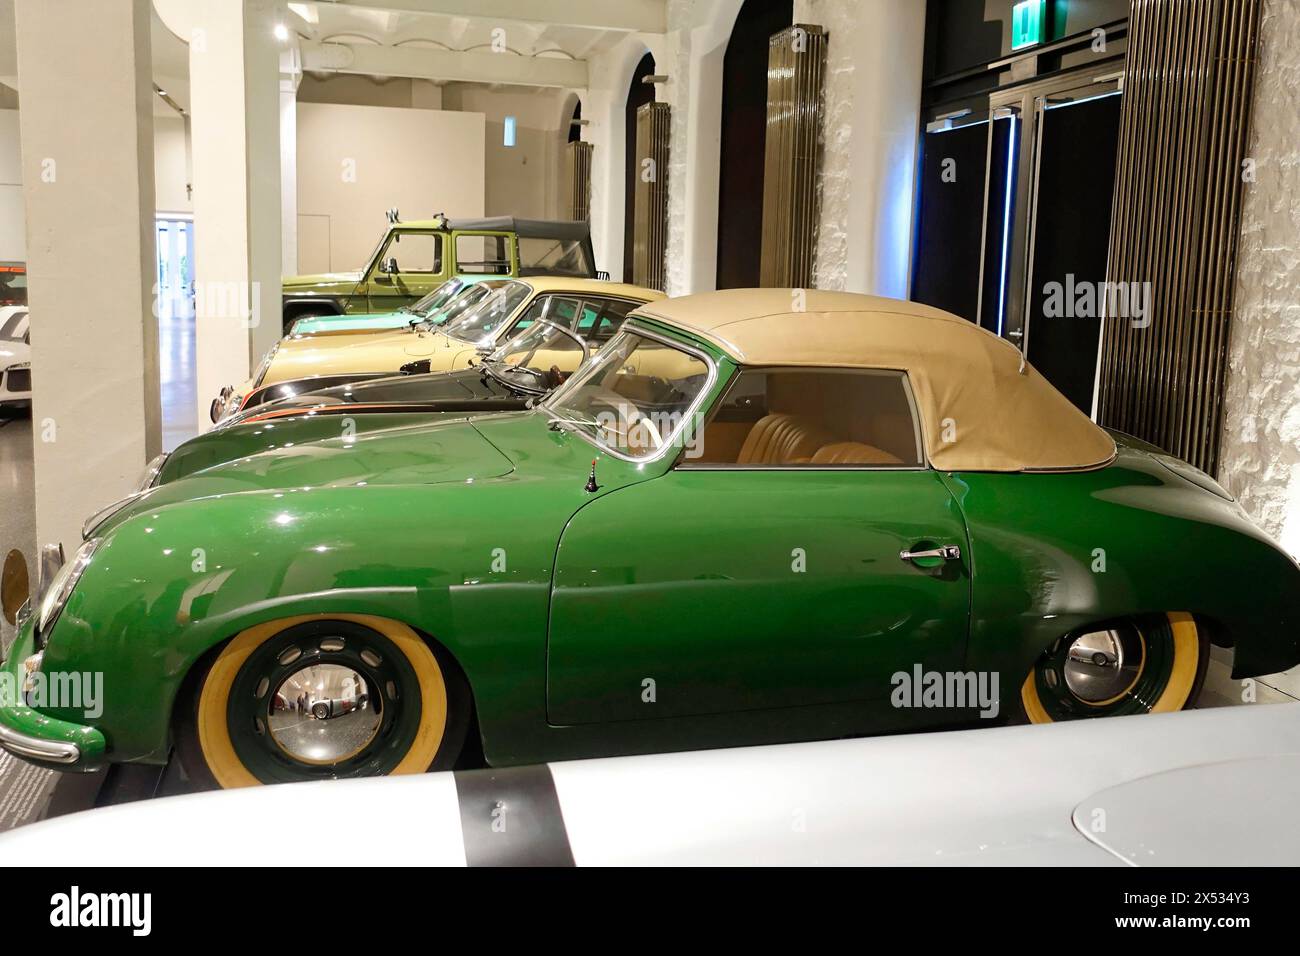 A green classic Porsche Cabriolet in an automobile exhibition, AUTOMUSEUM PROTOTYP, Hamburg, Hanseatic City of Hamburg, Germany Europe Stock Photo